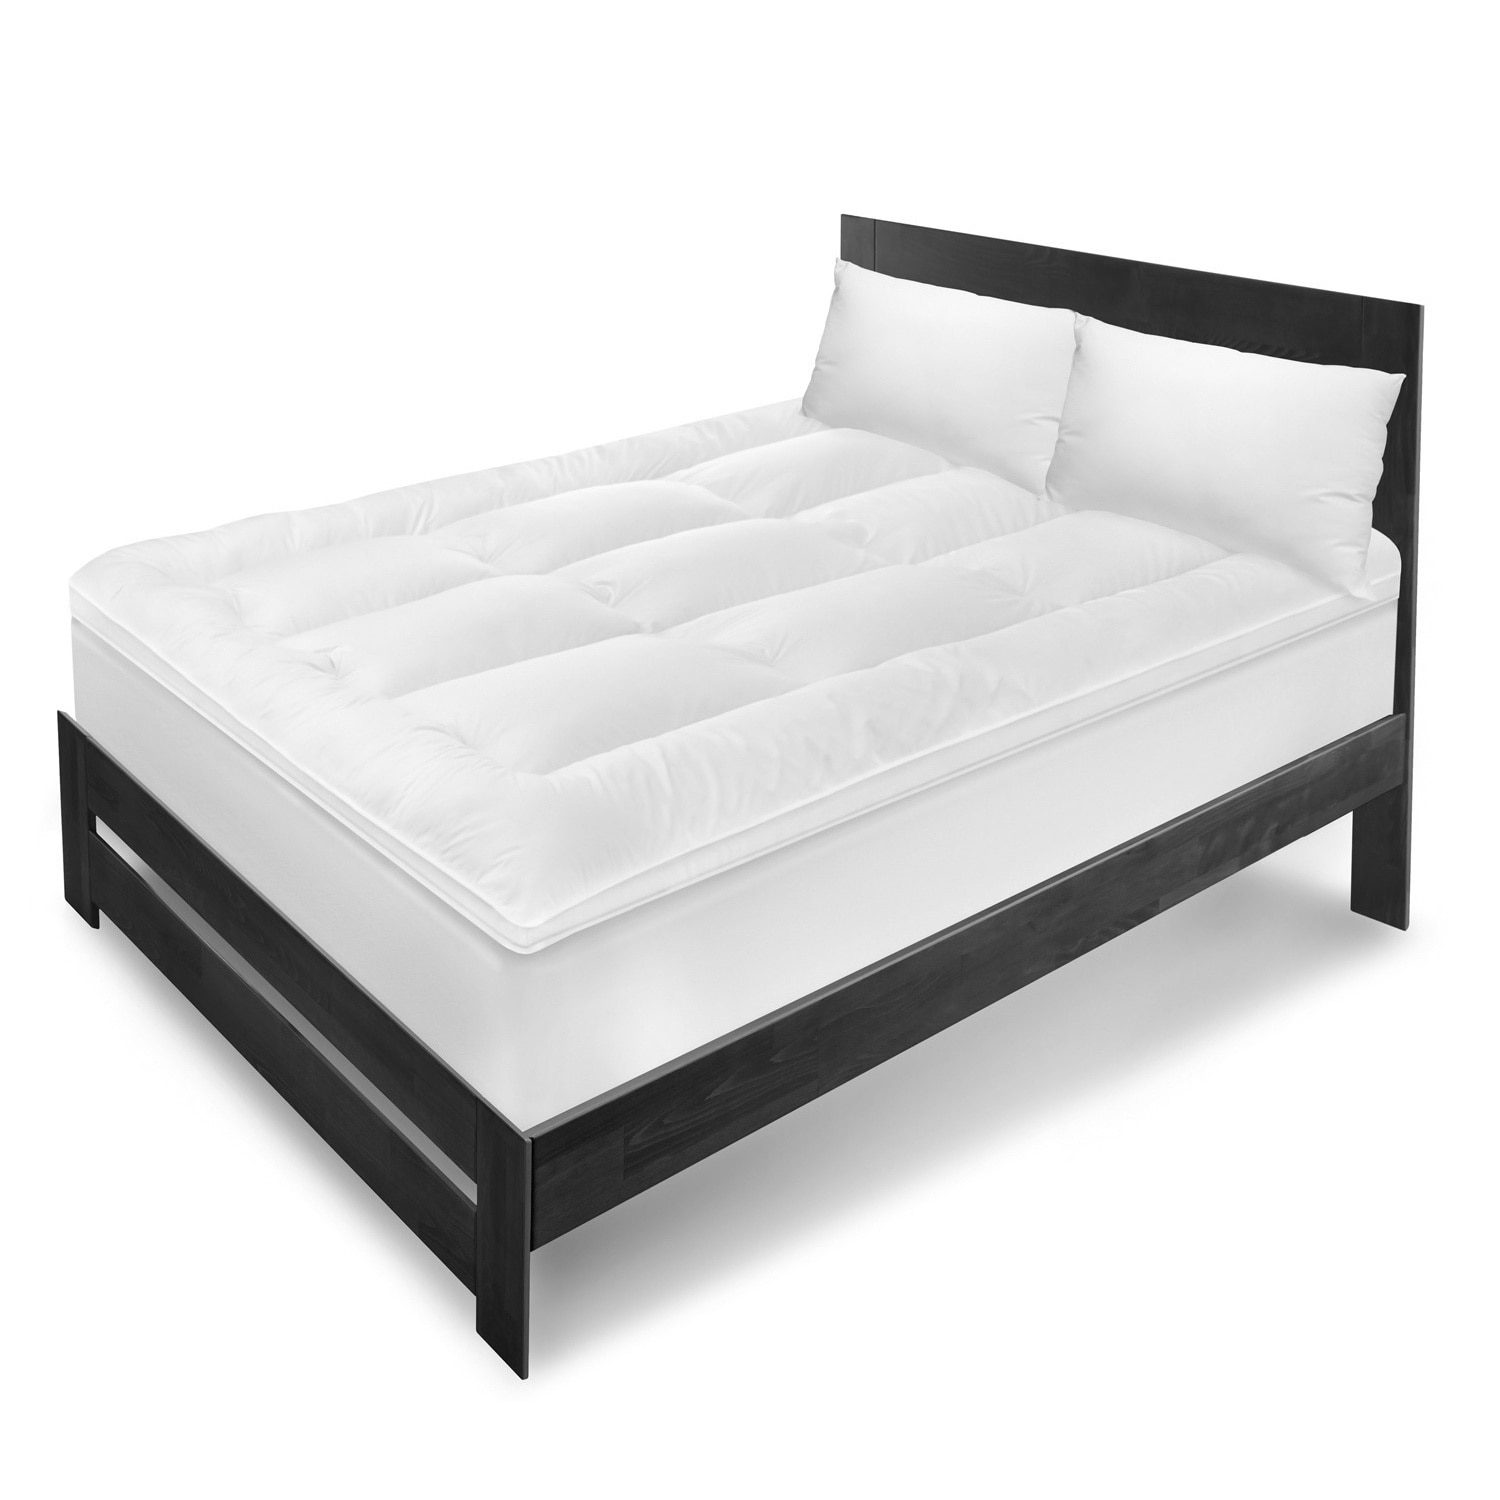 Swiss Lux Eco Feather Bed Topper